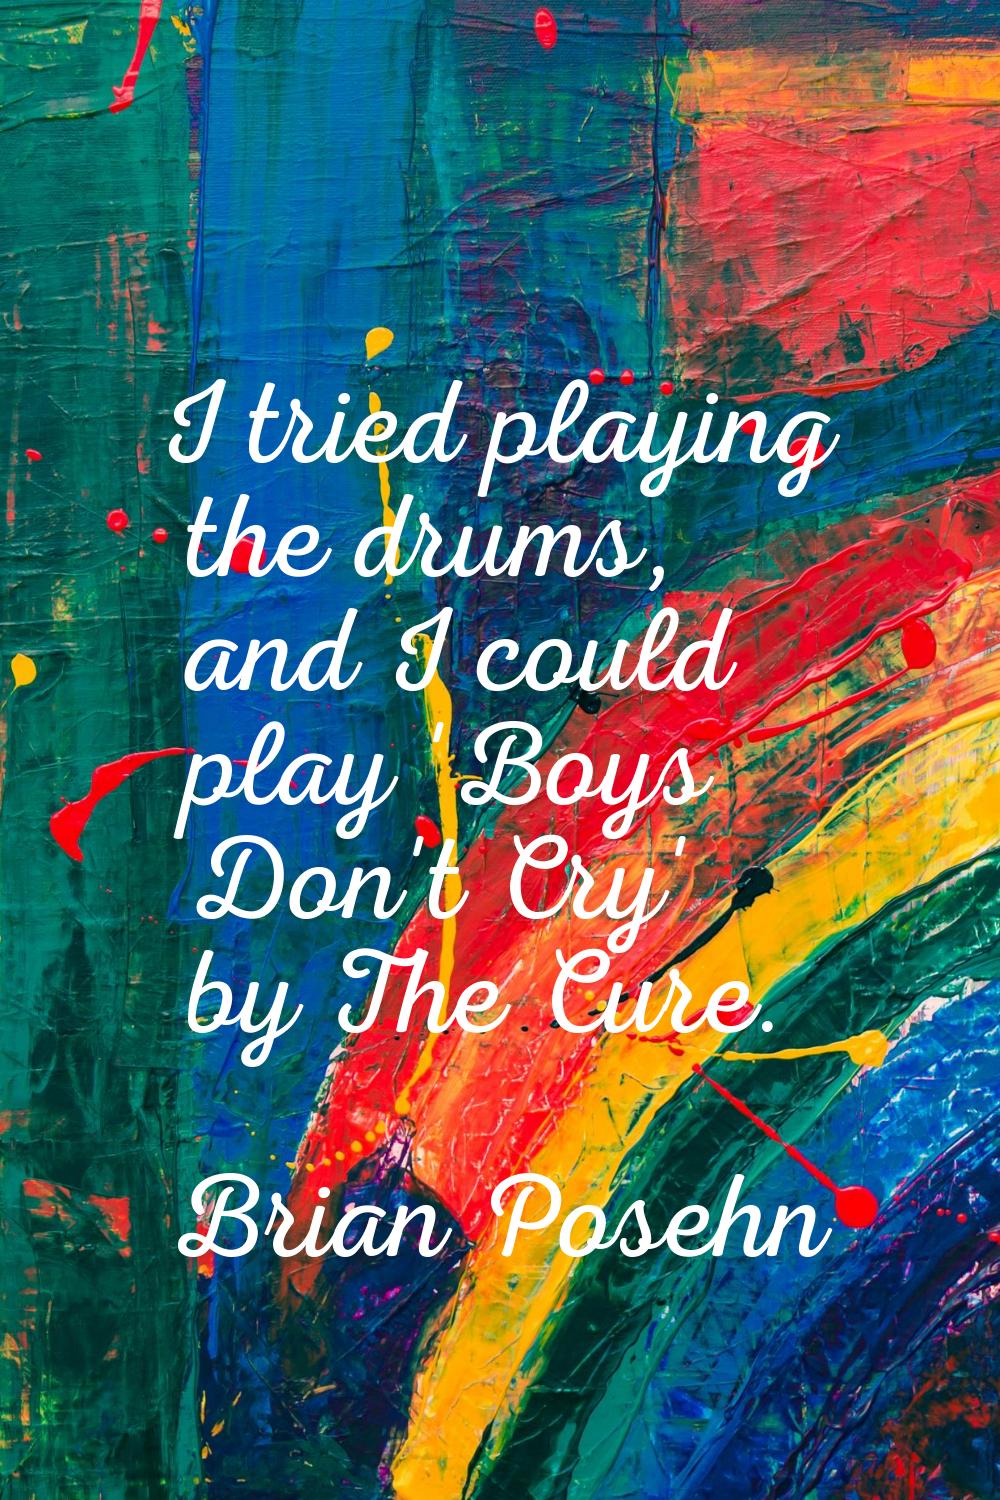 I tried playing the drums, and I could play 'Boys Don't Cry' by The Cure.